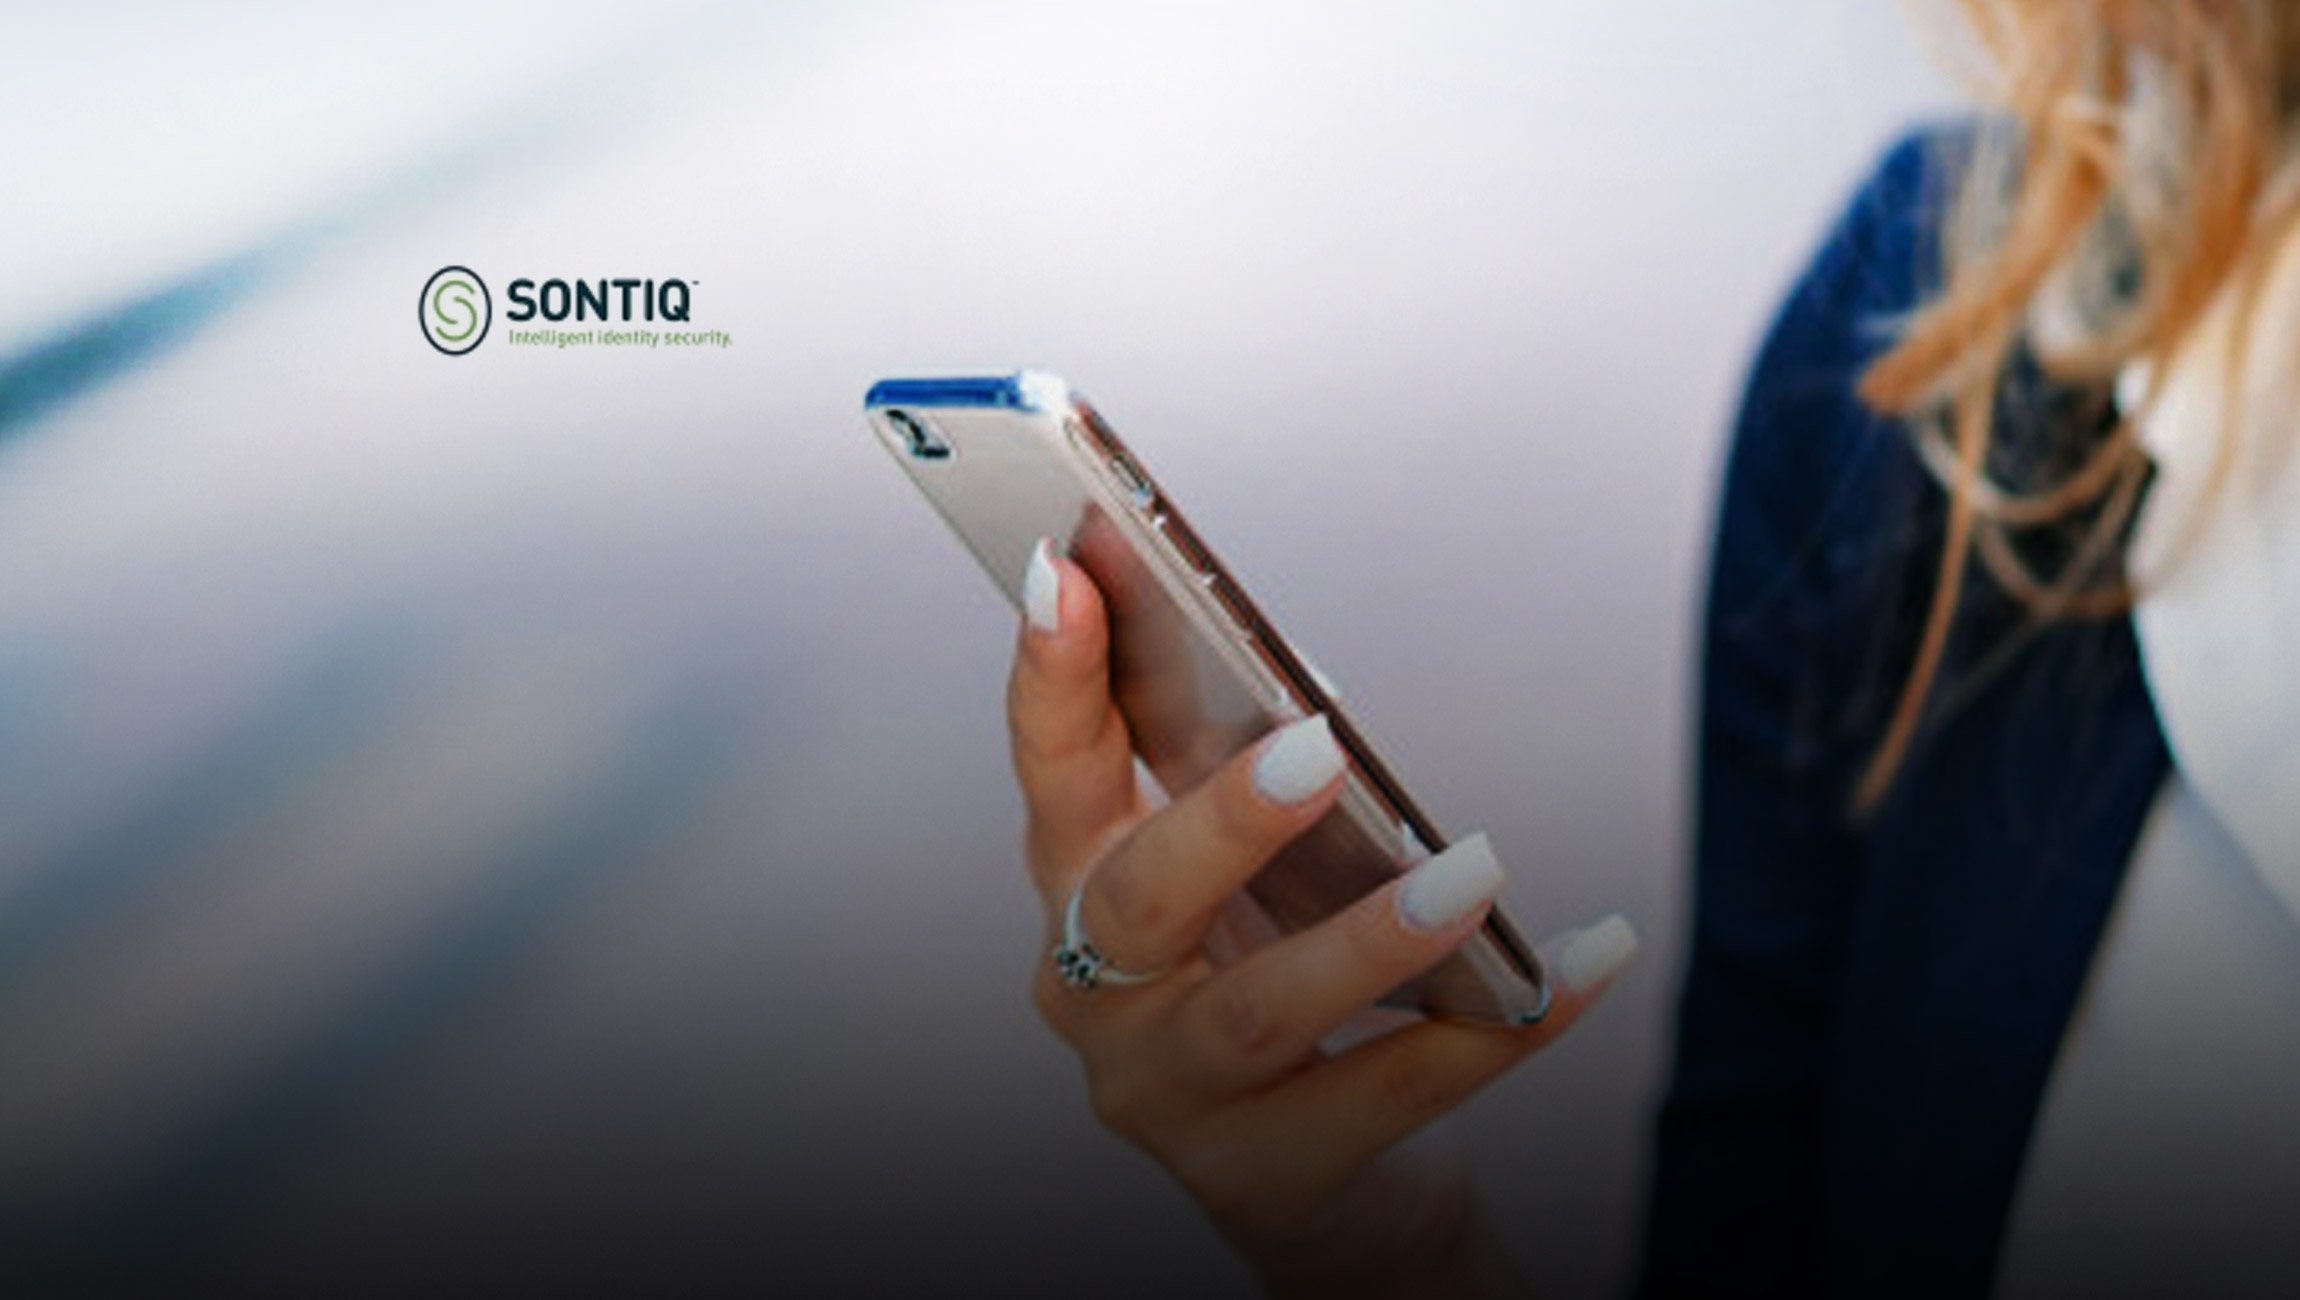 Sontiq Announces Definitive Agreement to Acquire Cyberscout the Leading Cyber Products and Services Provider to the Insurance Industry